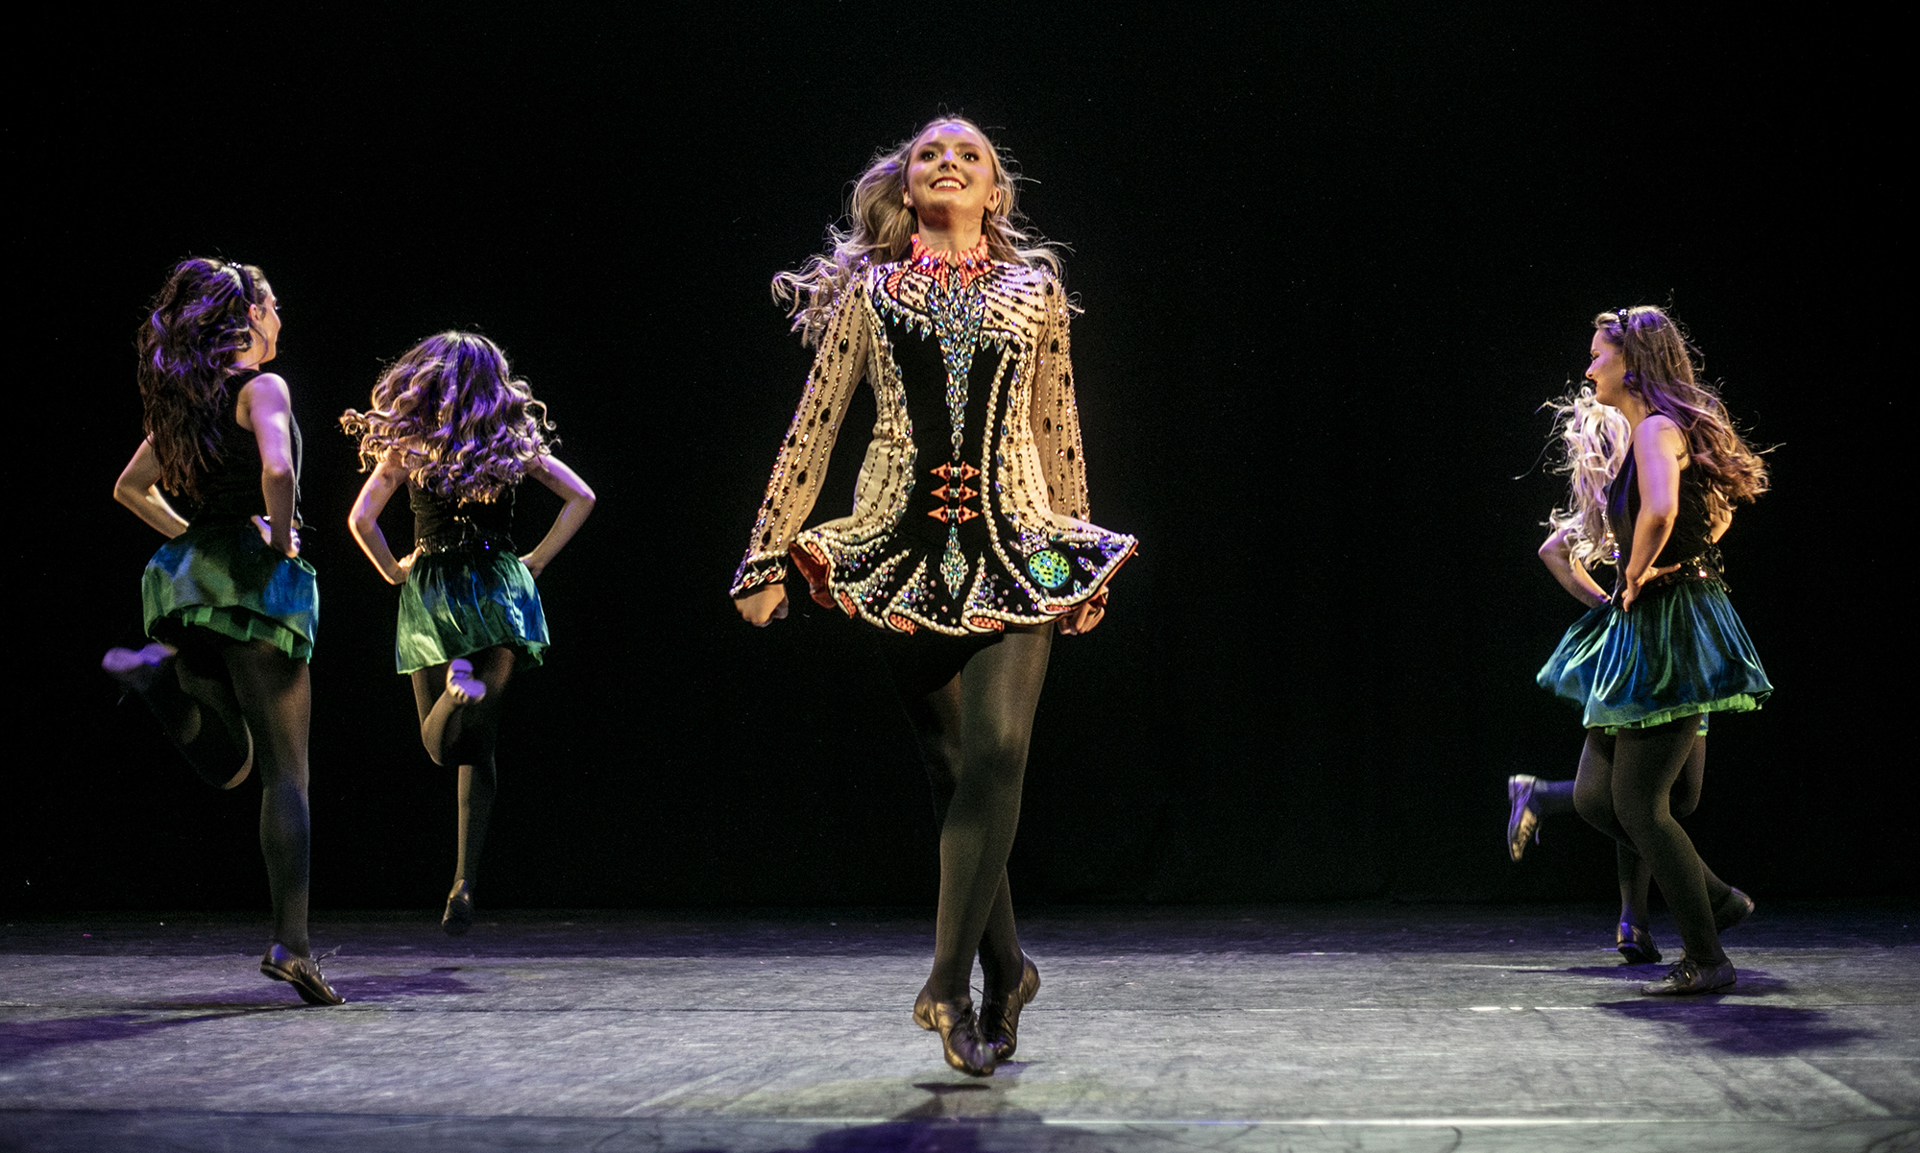 White female Irish dancers circleing one female dancer with arms and legs straight with feet crossed wearing gold traditional Irish dress. Background dancers wearing black and green dresses on a dark stage 